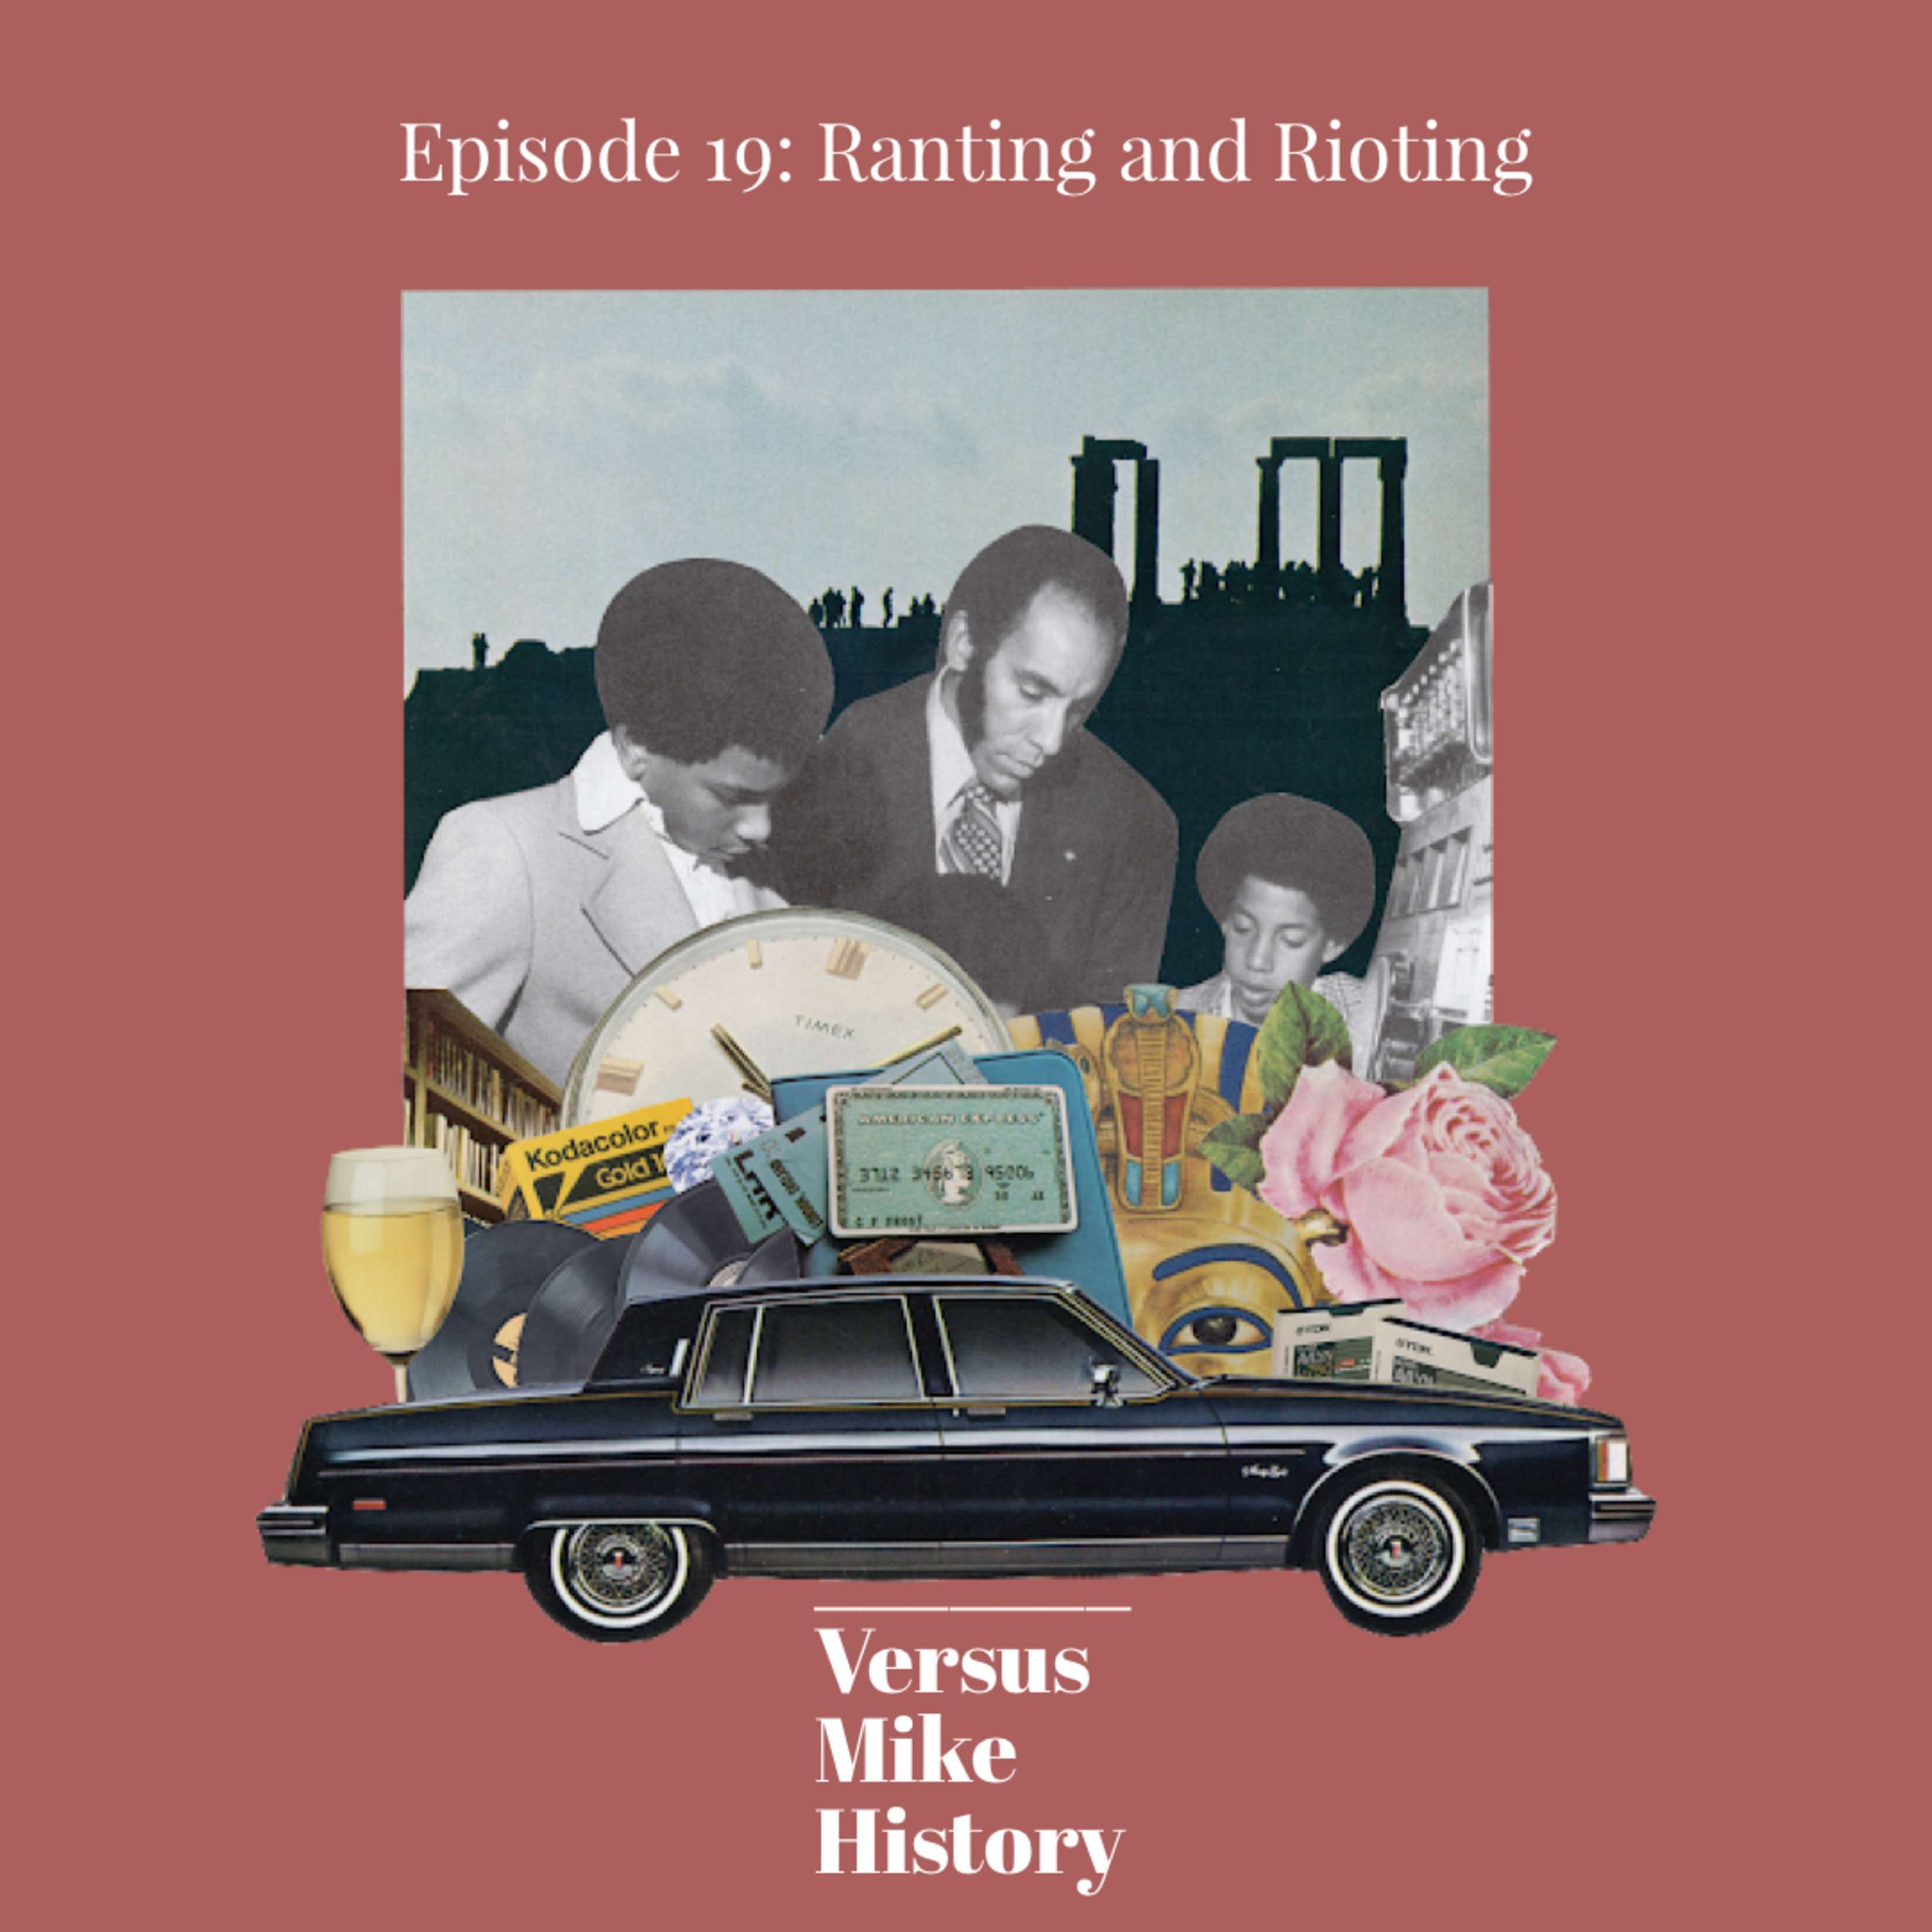 Episode 19: Ranting and Rioting